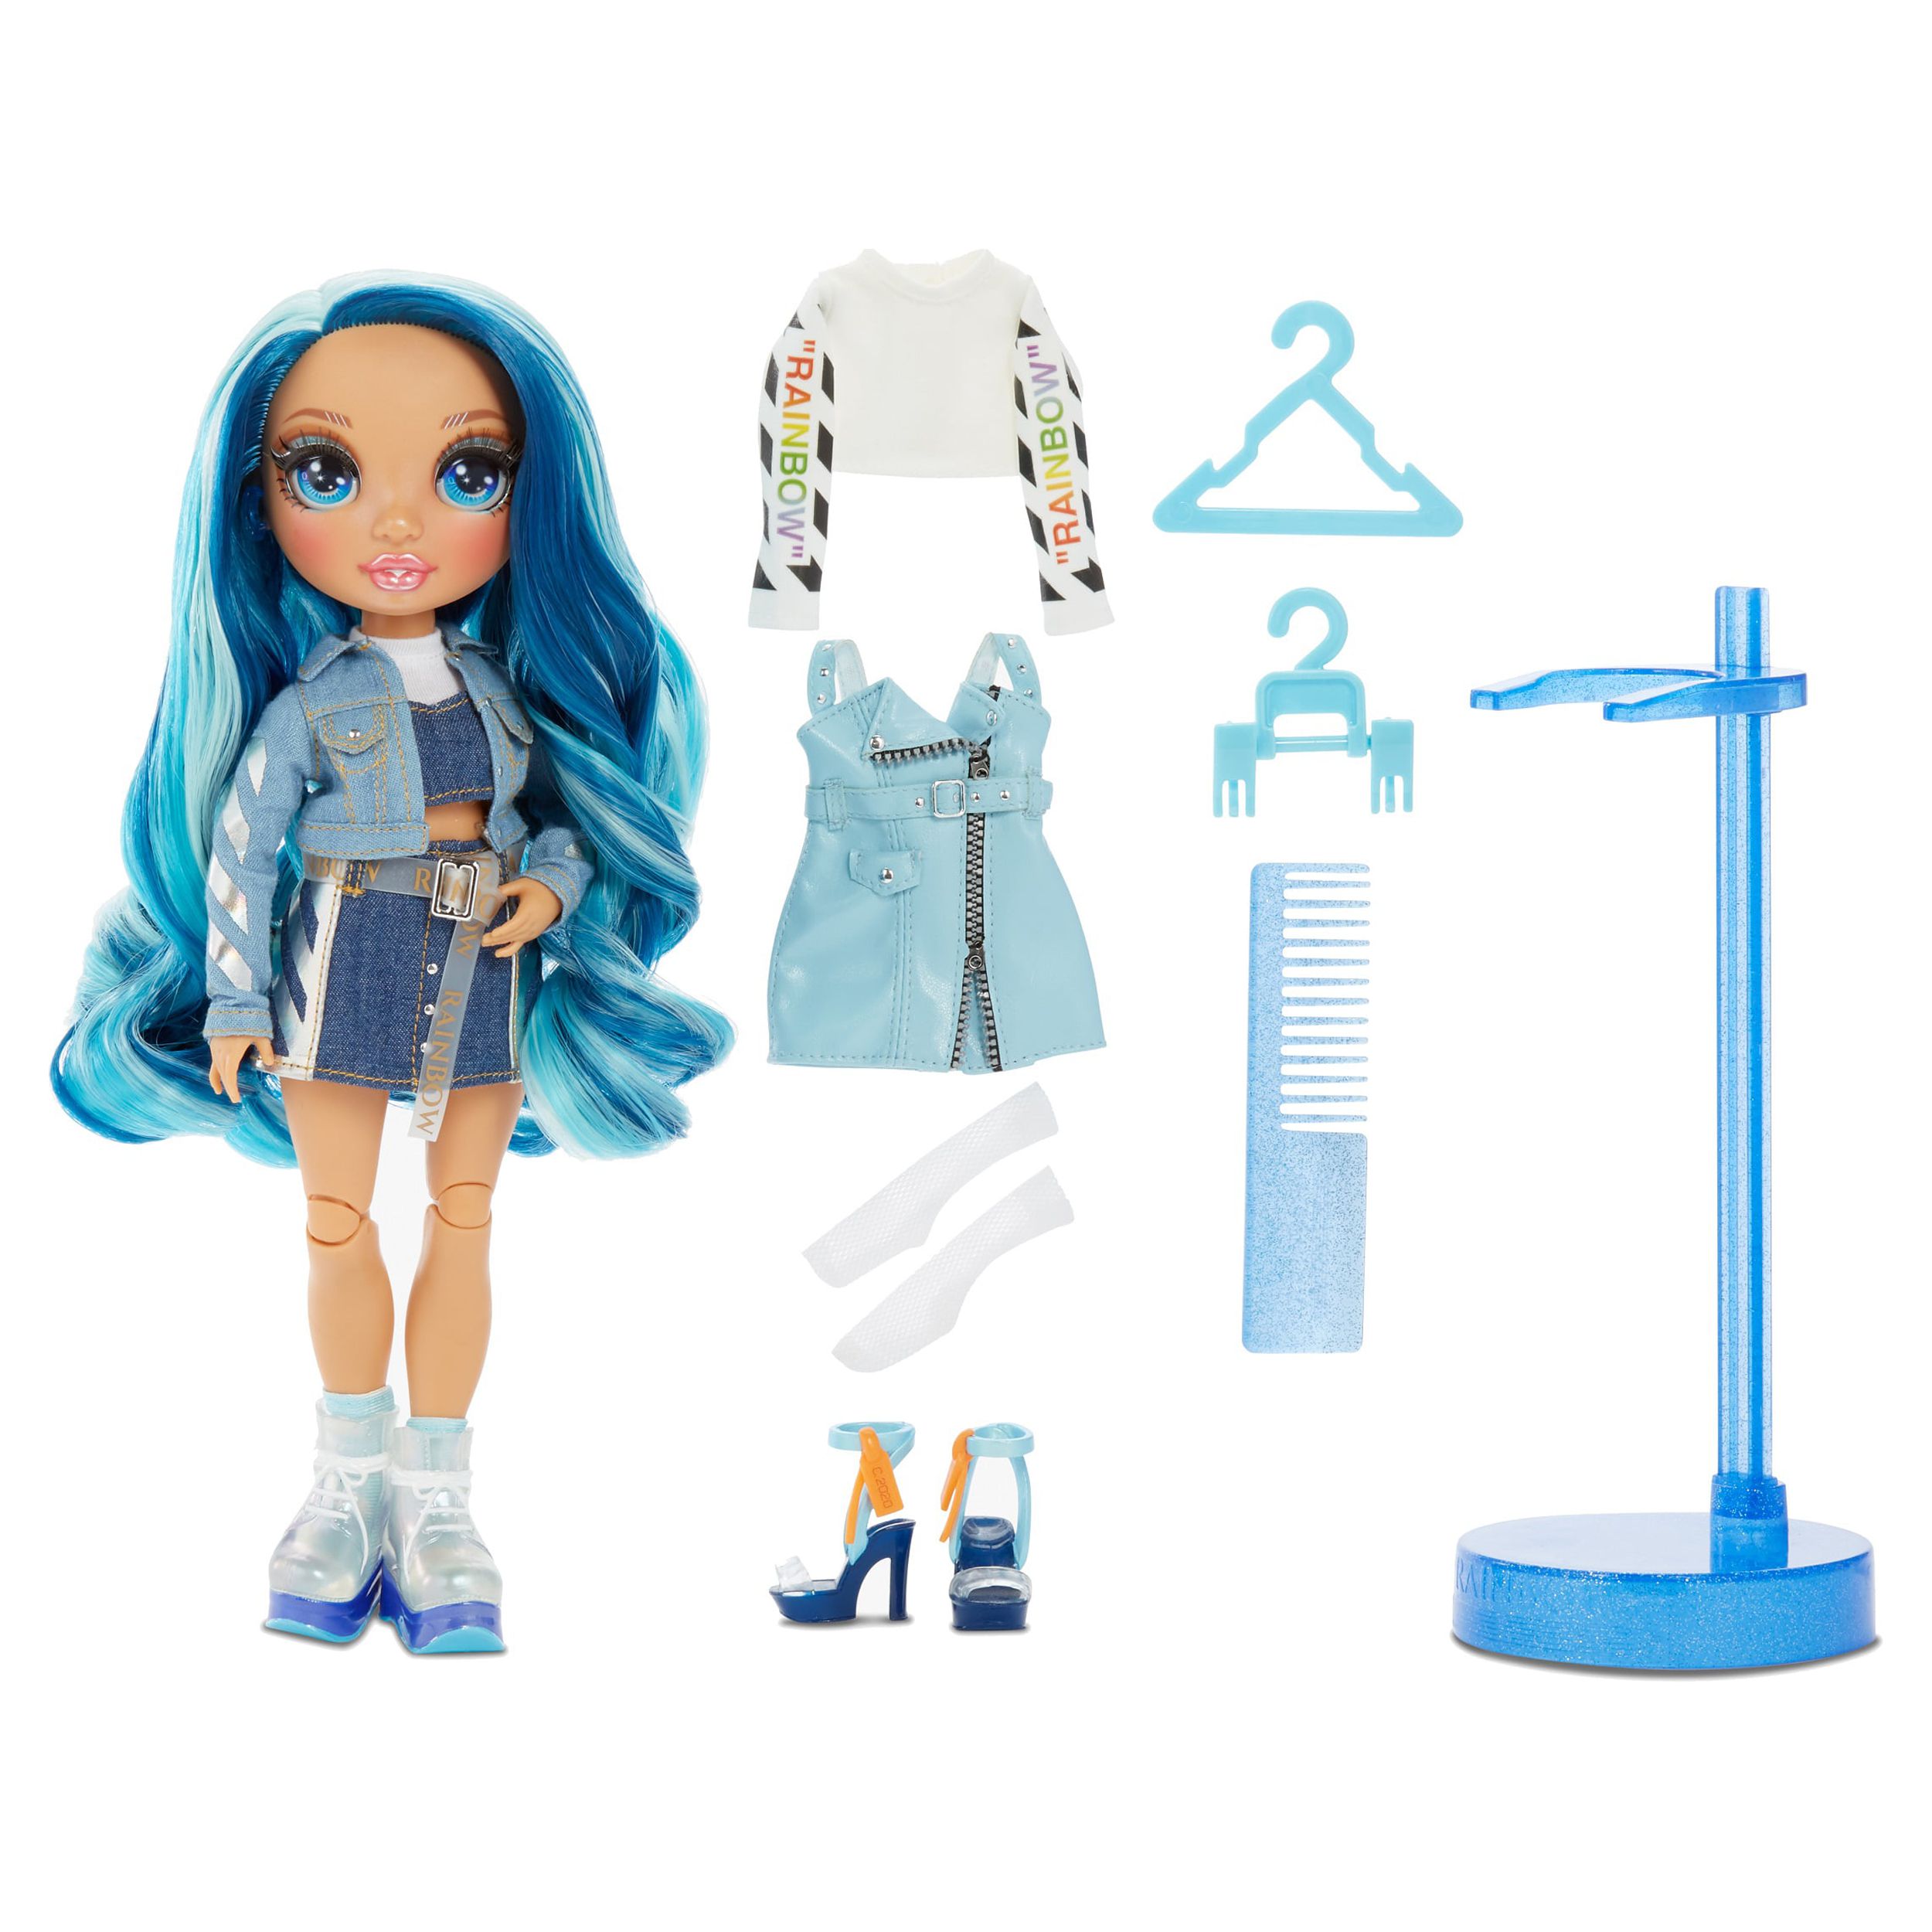 Rainbow High Skyler Bradshaw – Blue Fashion Doll with 2 Outfits - image 4 of 8